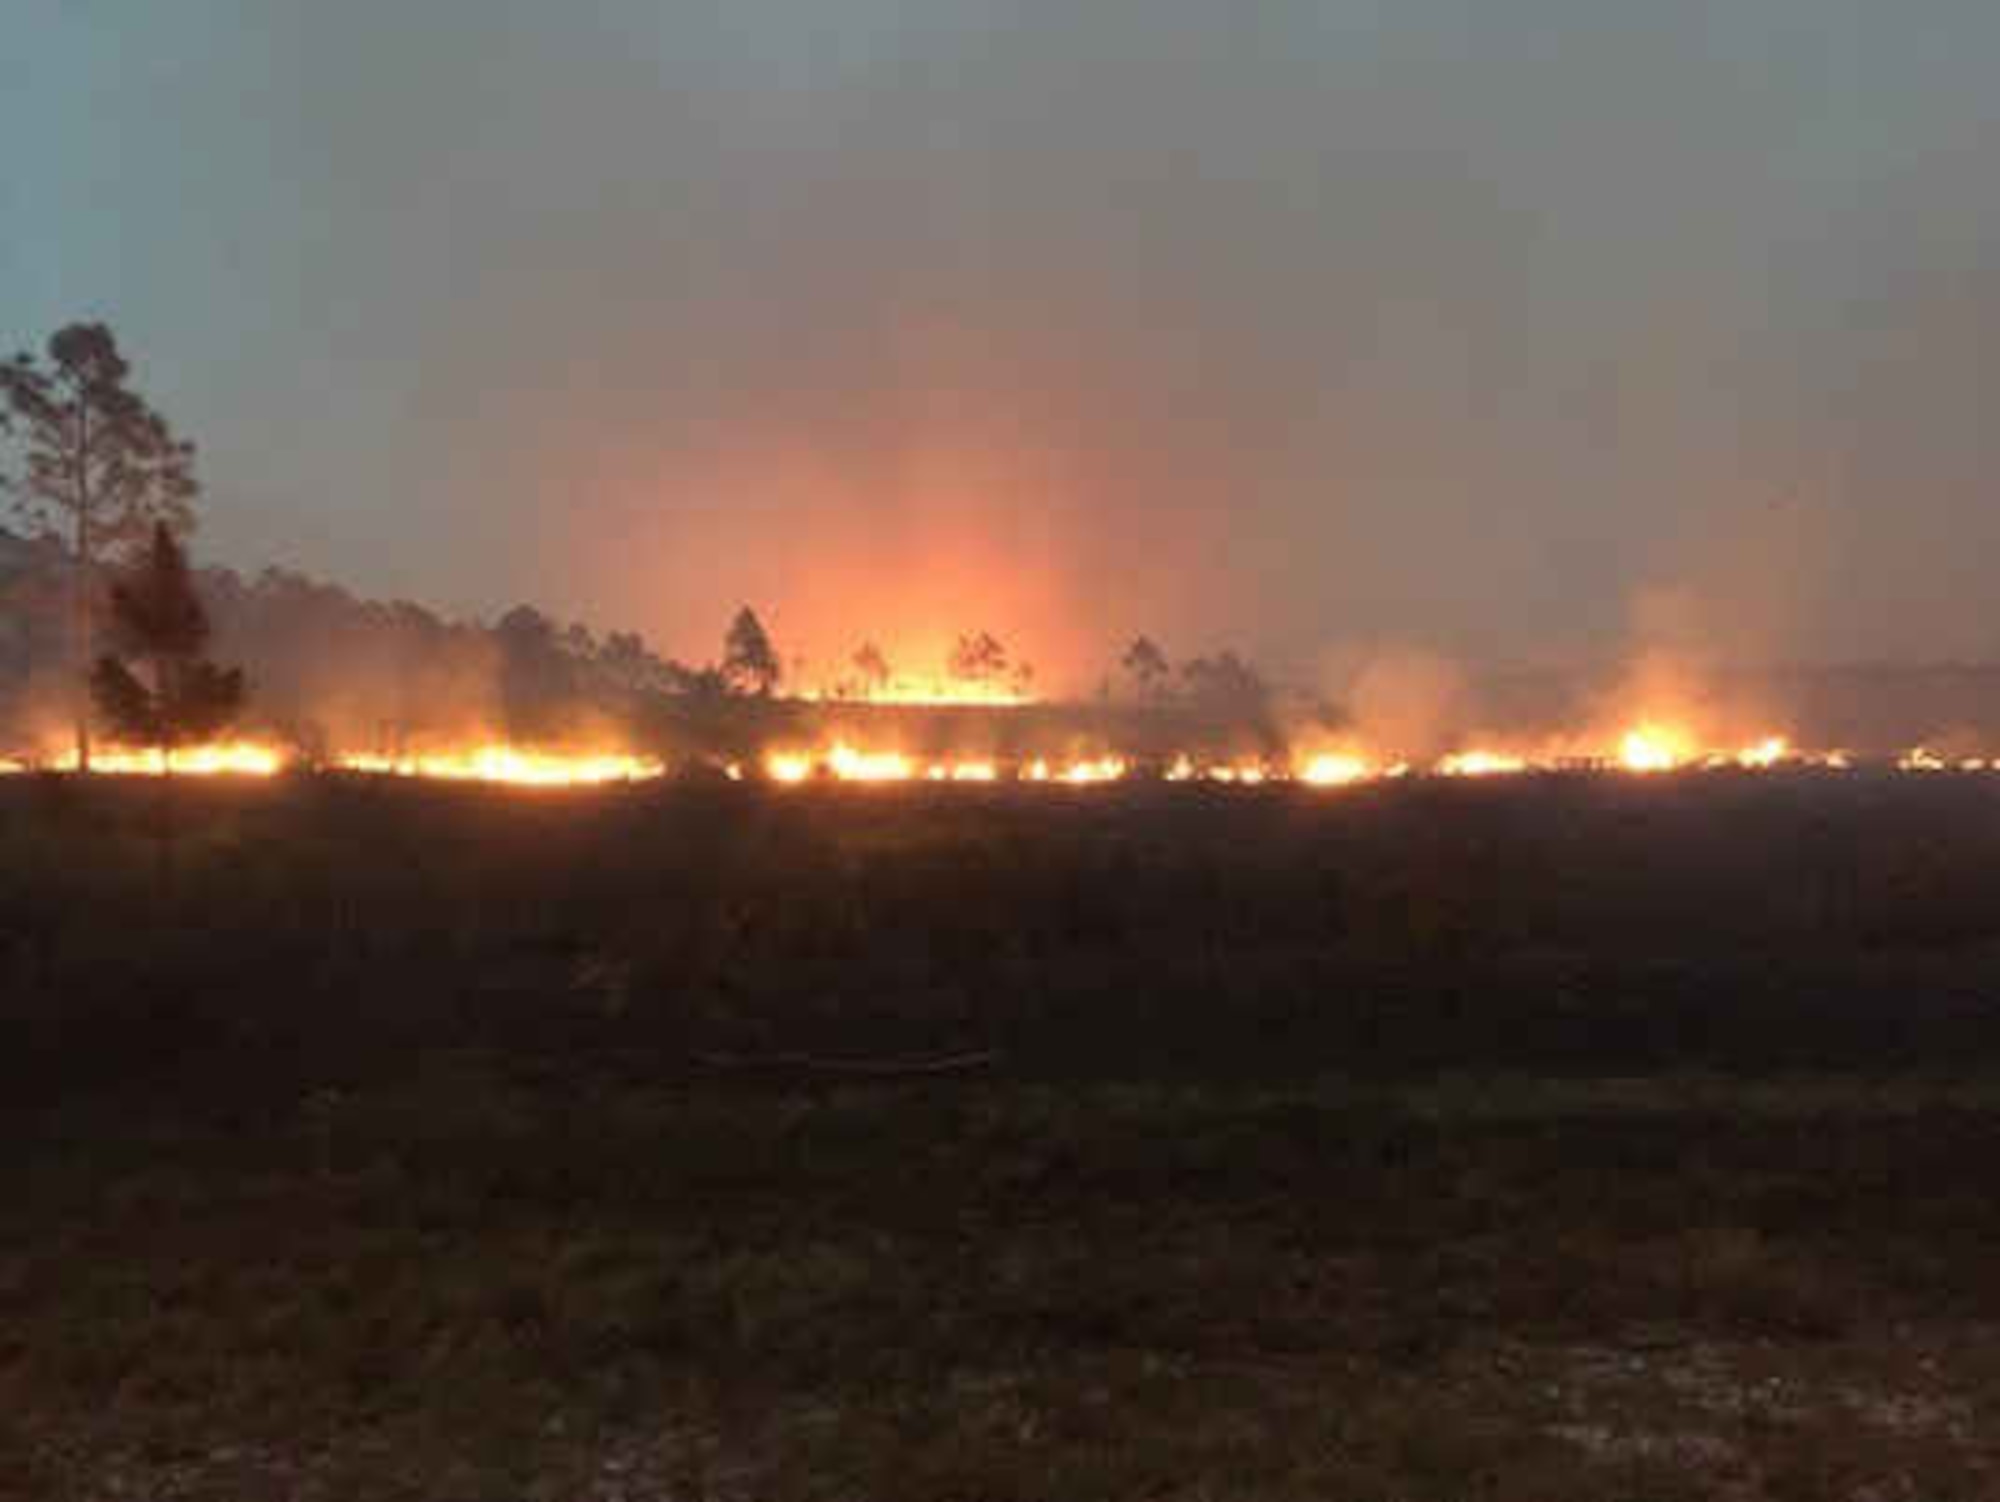 An Air Force Wildland Fire Center team, supported by teams from the Florida Forest Service and the U.S. Fish and Wildlife Service, is working to contain an 8,000-acre wildfire on the Avon Park Air Force Range in Florida. The AFWFC is part of the Air Force Civil Engineer Center’s Environmental Directorate at Joint Base San Antonio-Lackland, Texas. (Florida Forest Service photo)